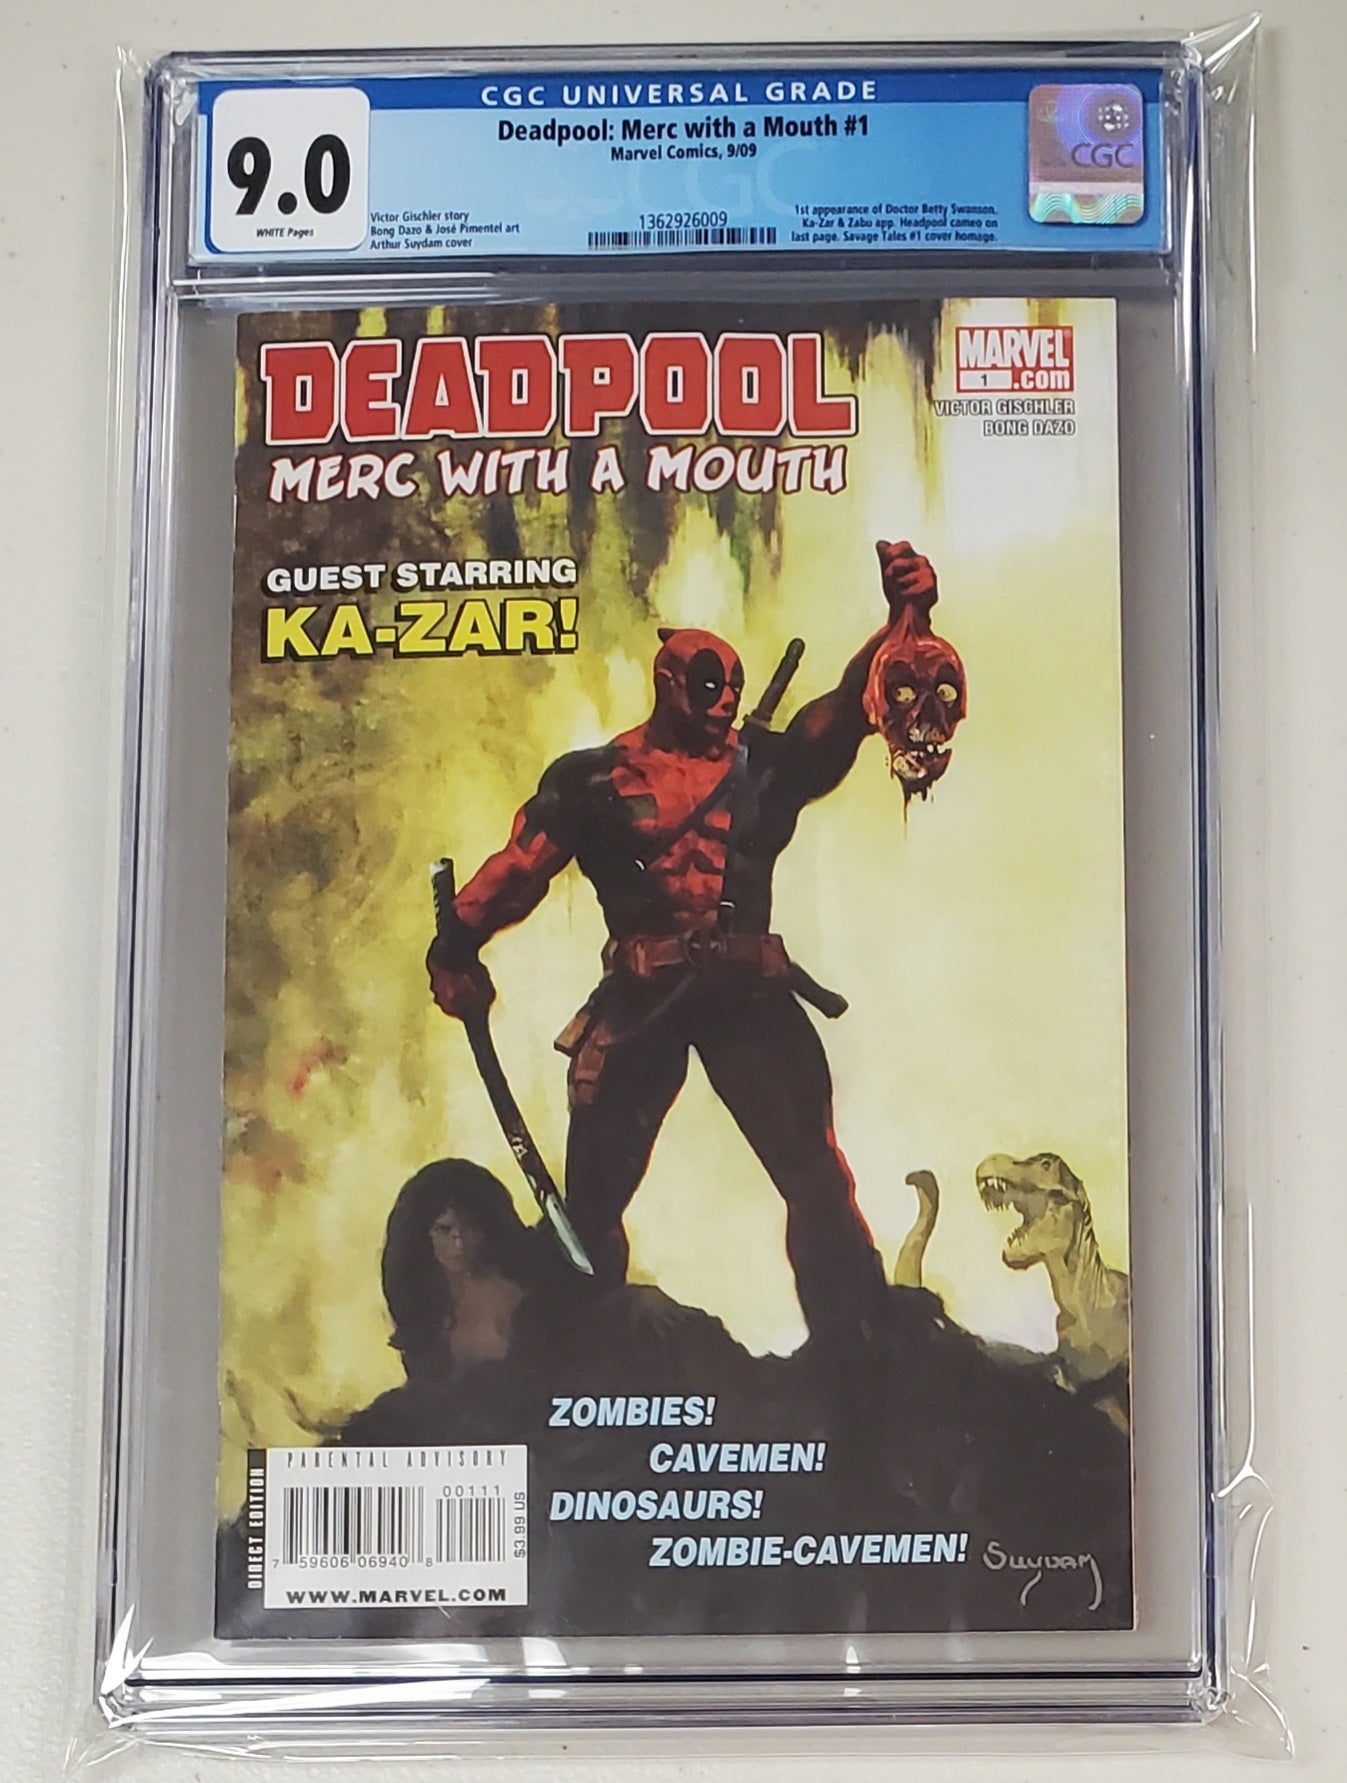 9.0 CGC Deadpool Merc with a Mouth #1 (1st Dr. Betty Swanson) 2009 [1362926009]